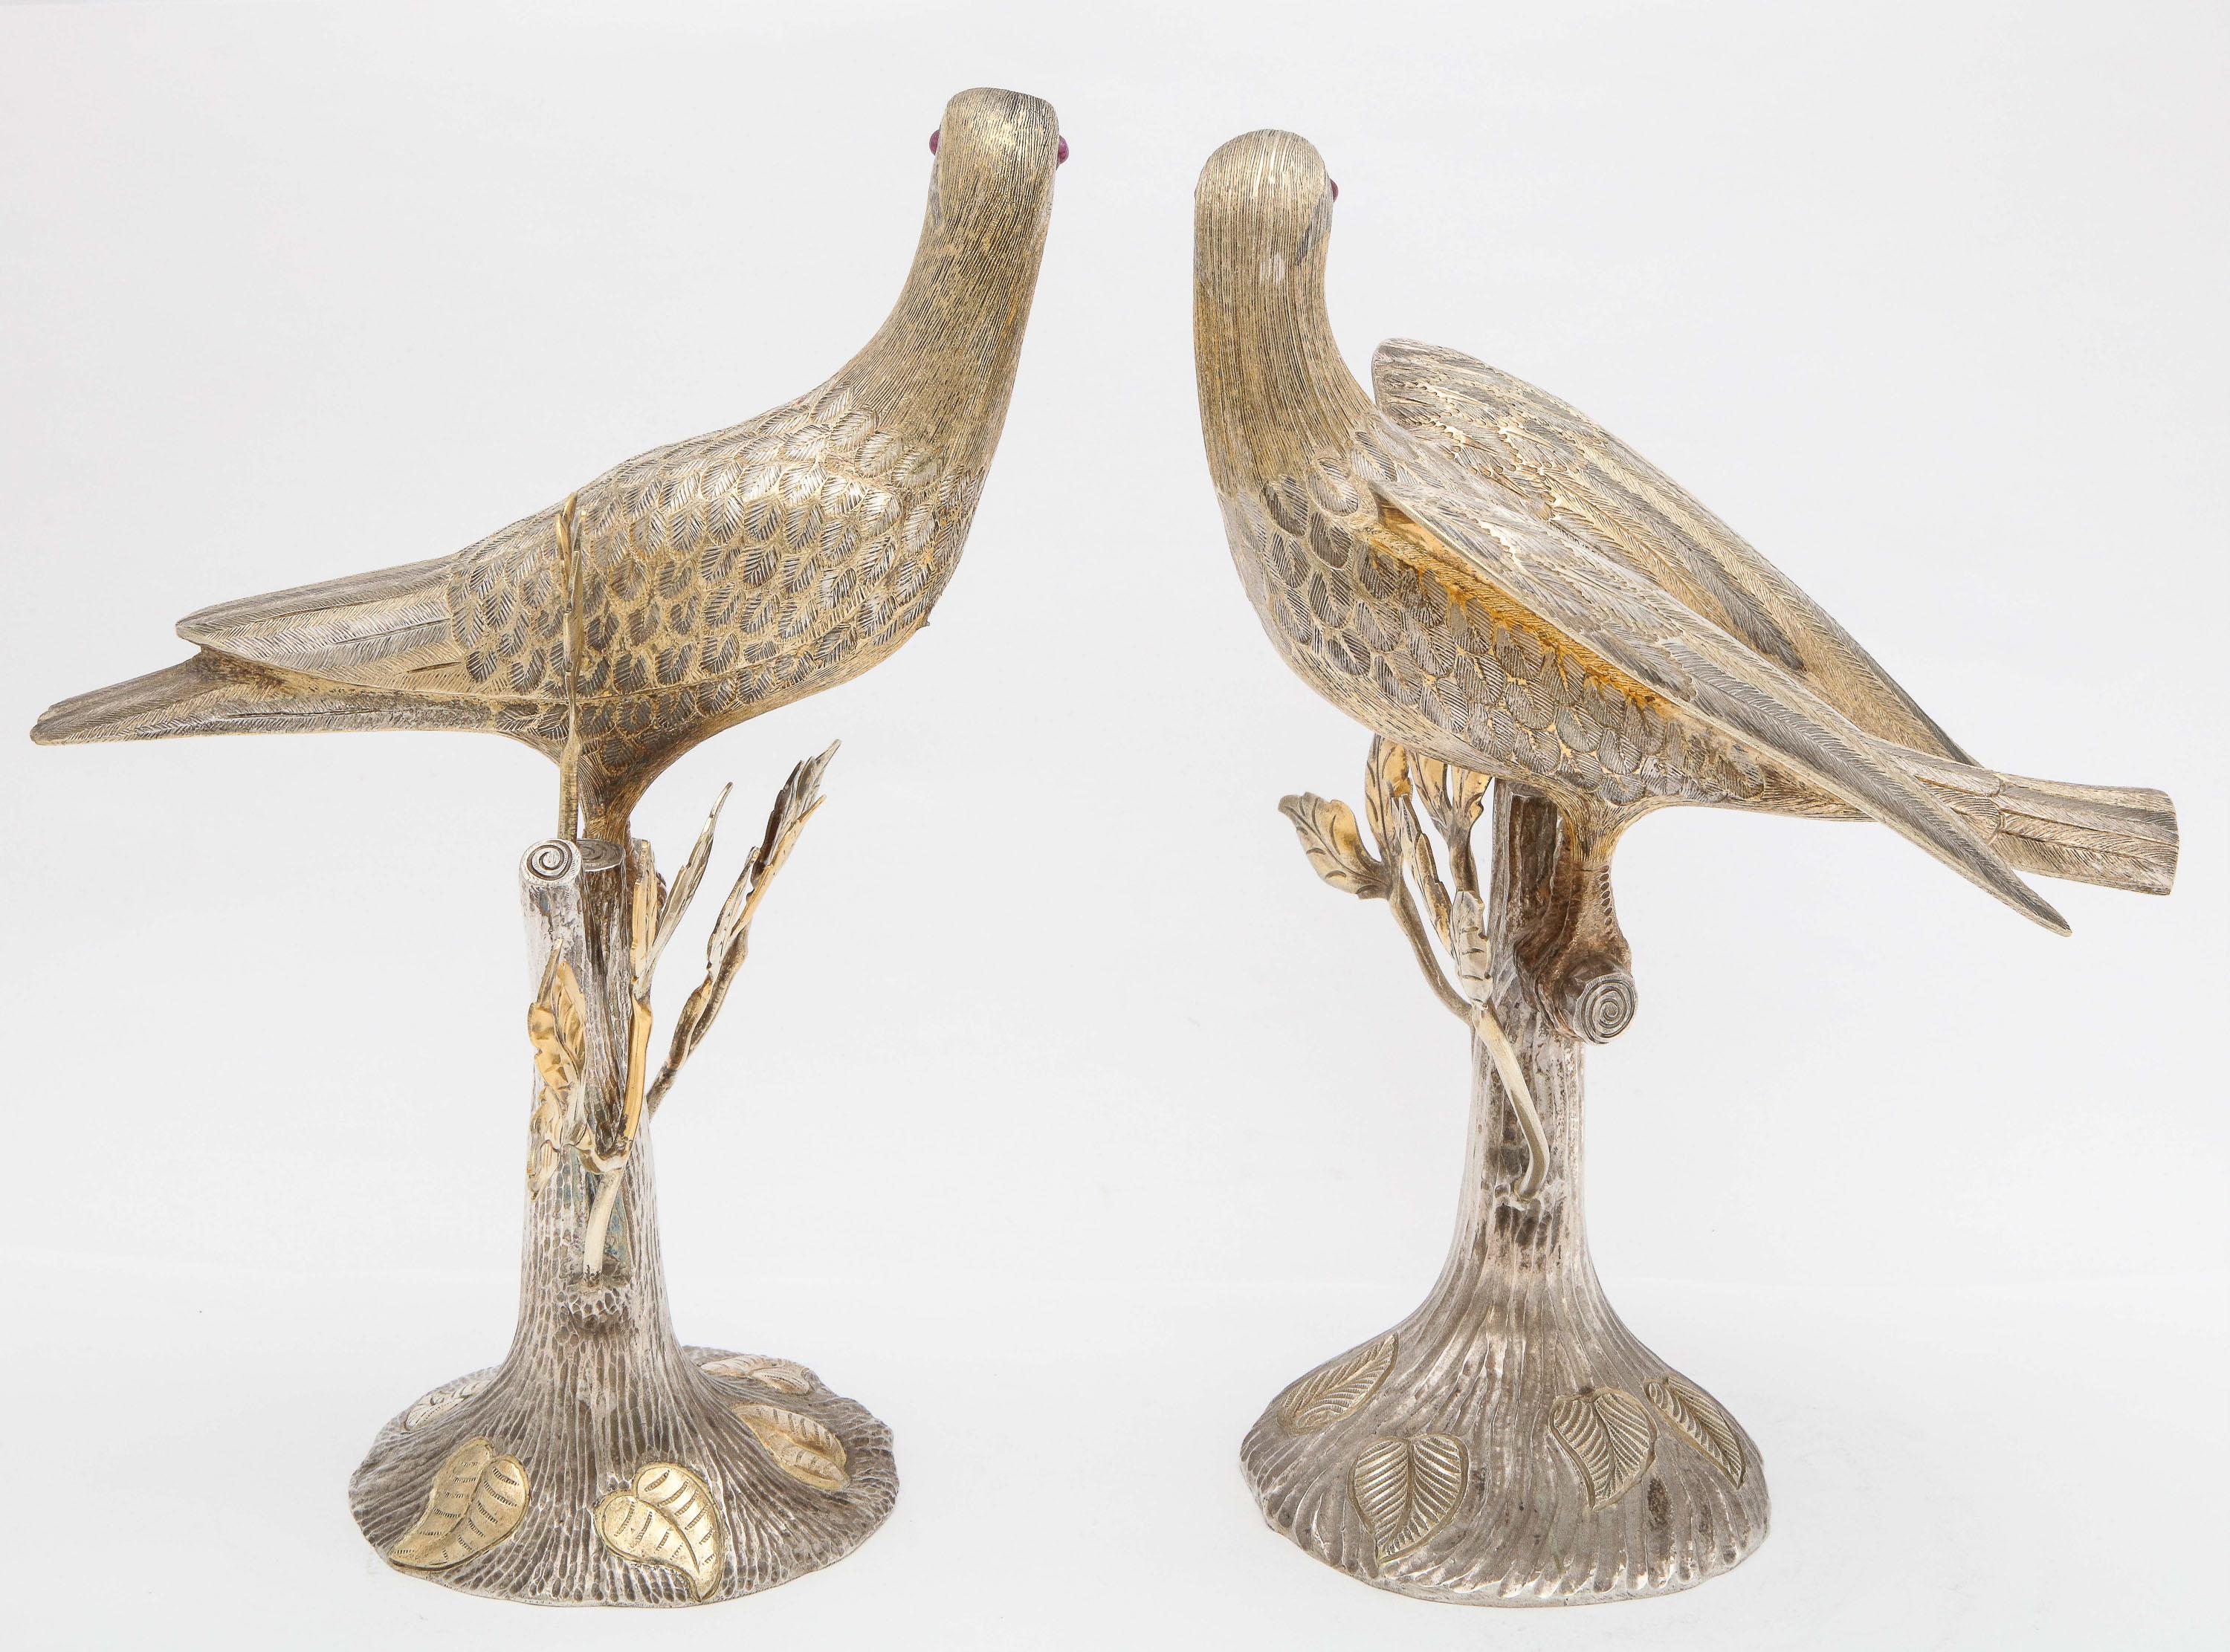 Gilt Midcentury Decorative Pair of Sterling Silver Table Birds by Tane